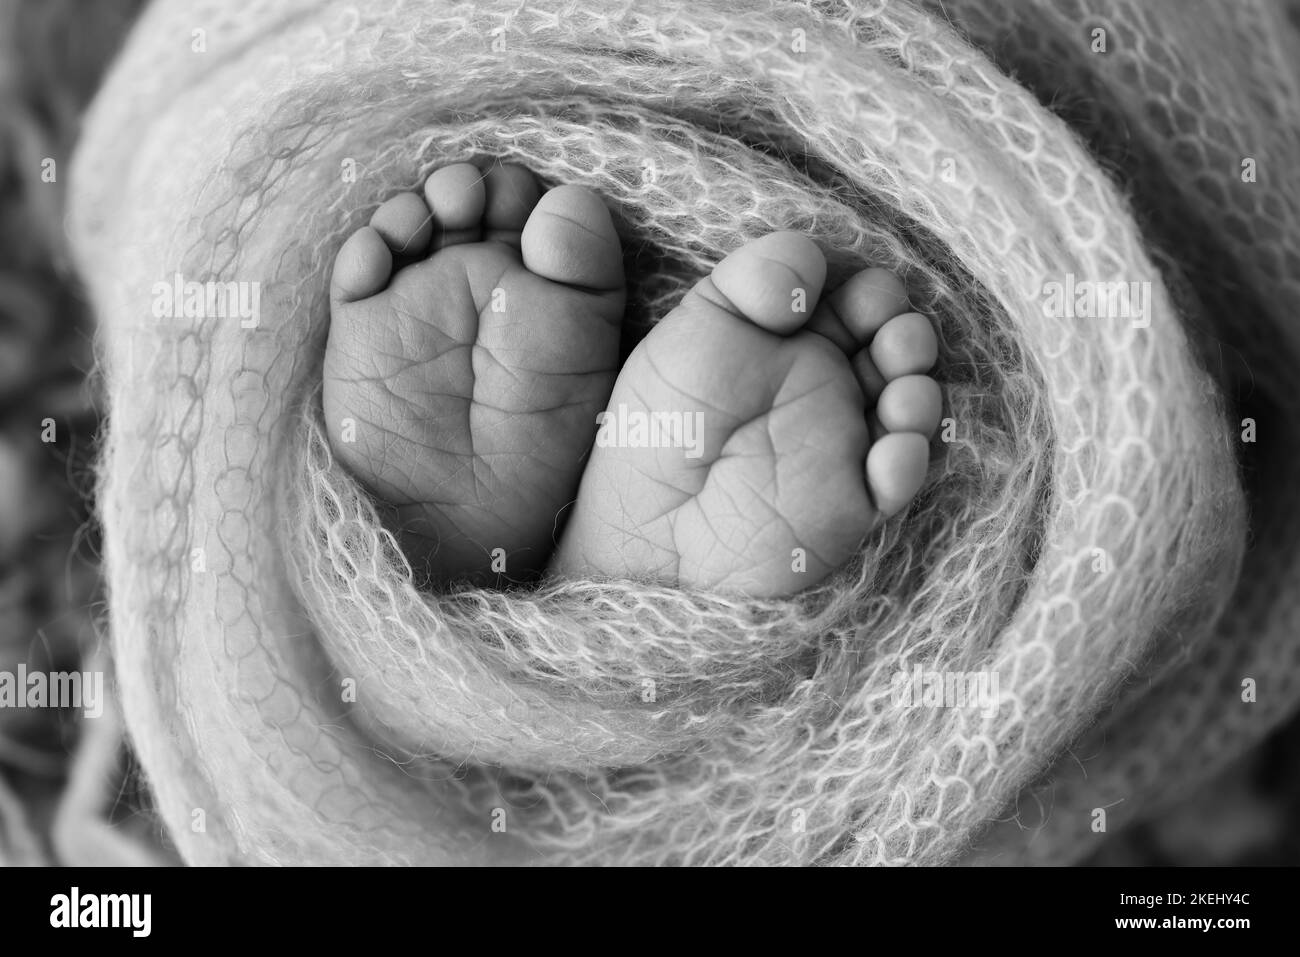 Close-up of toes, heels and feet of a baby.The tiny foot of a newborn.  Stock Photo